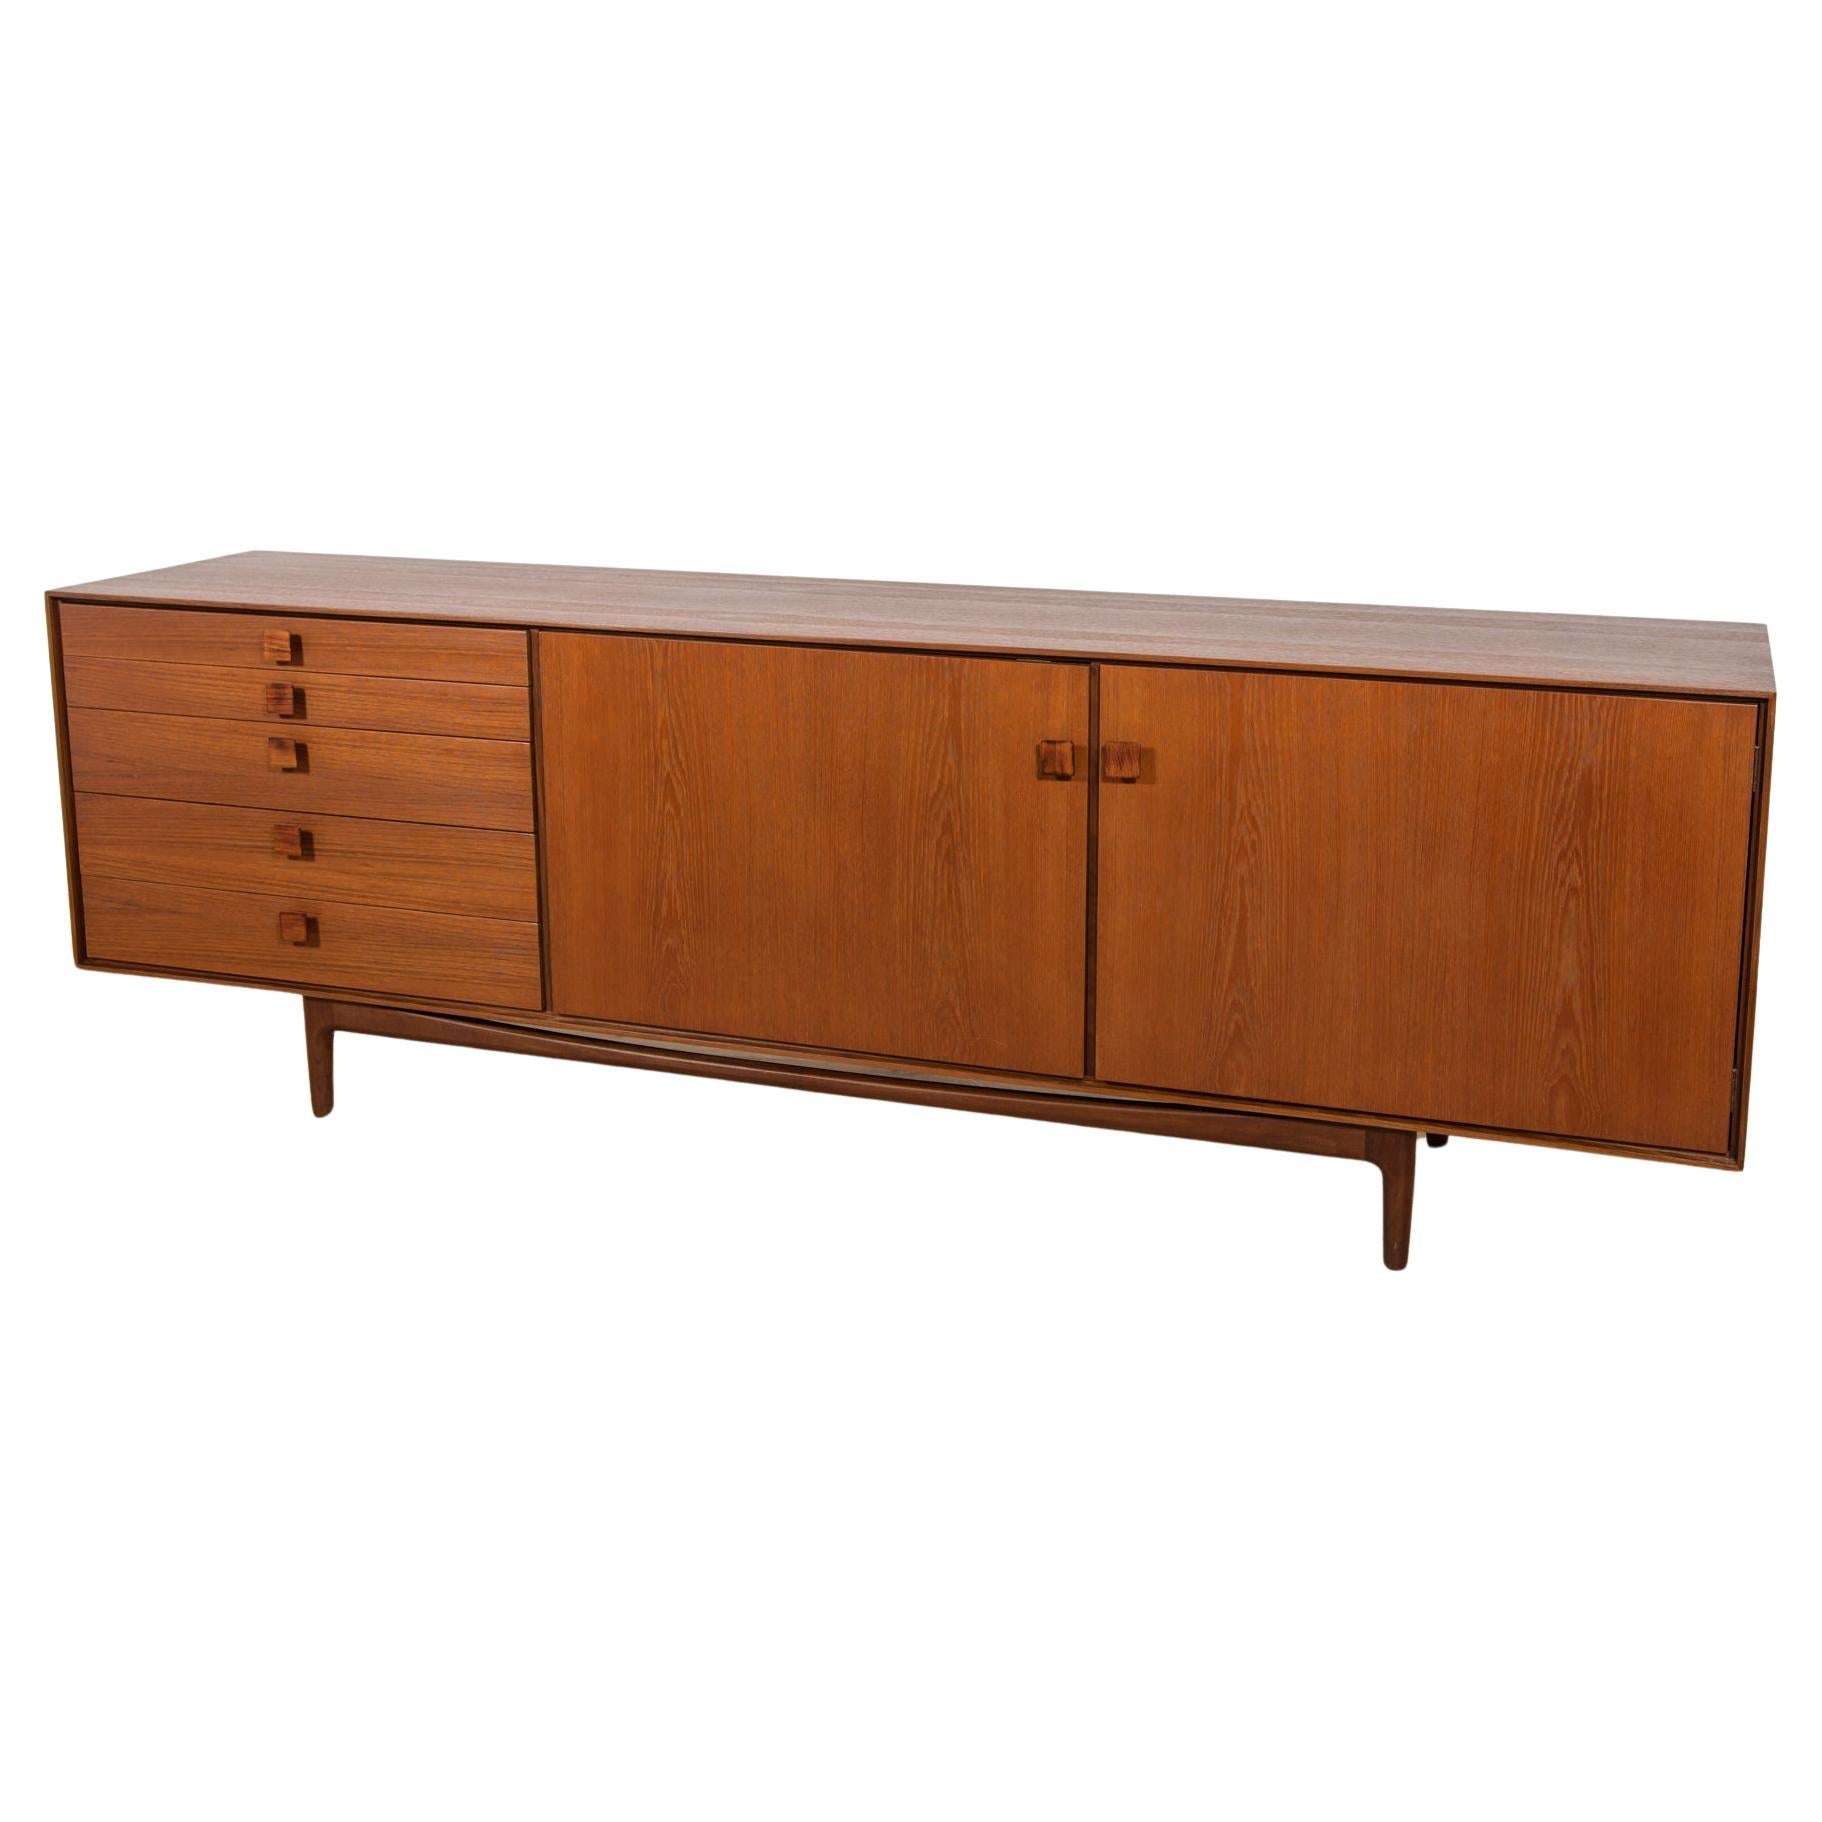 Mid-Century Sideboard by Ib Kofod Larsen for G-Plan, 1960s For Sale